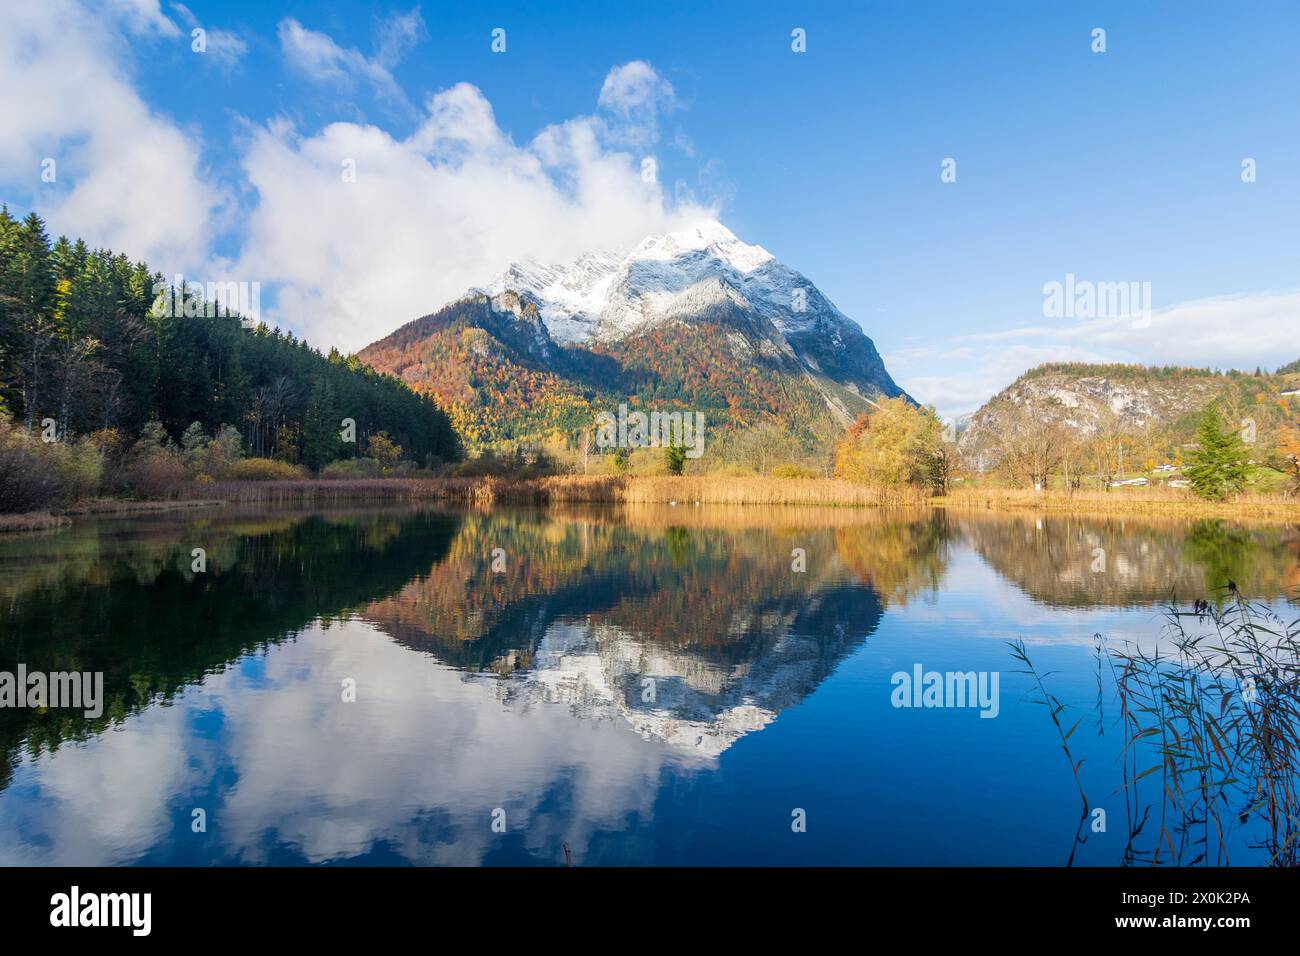 Stainach-Pürgg, snow covered mountain Grimming, fish pond in Schladming-Dachstein, Styria, Austria Stock Photo